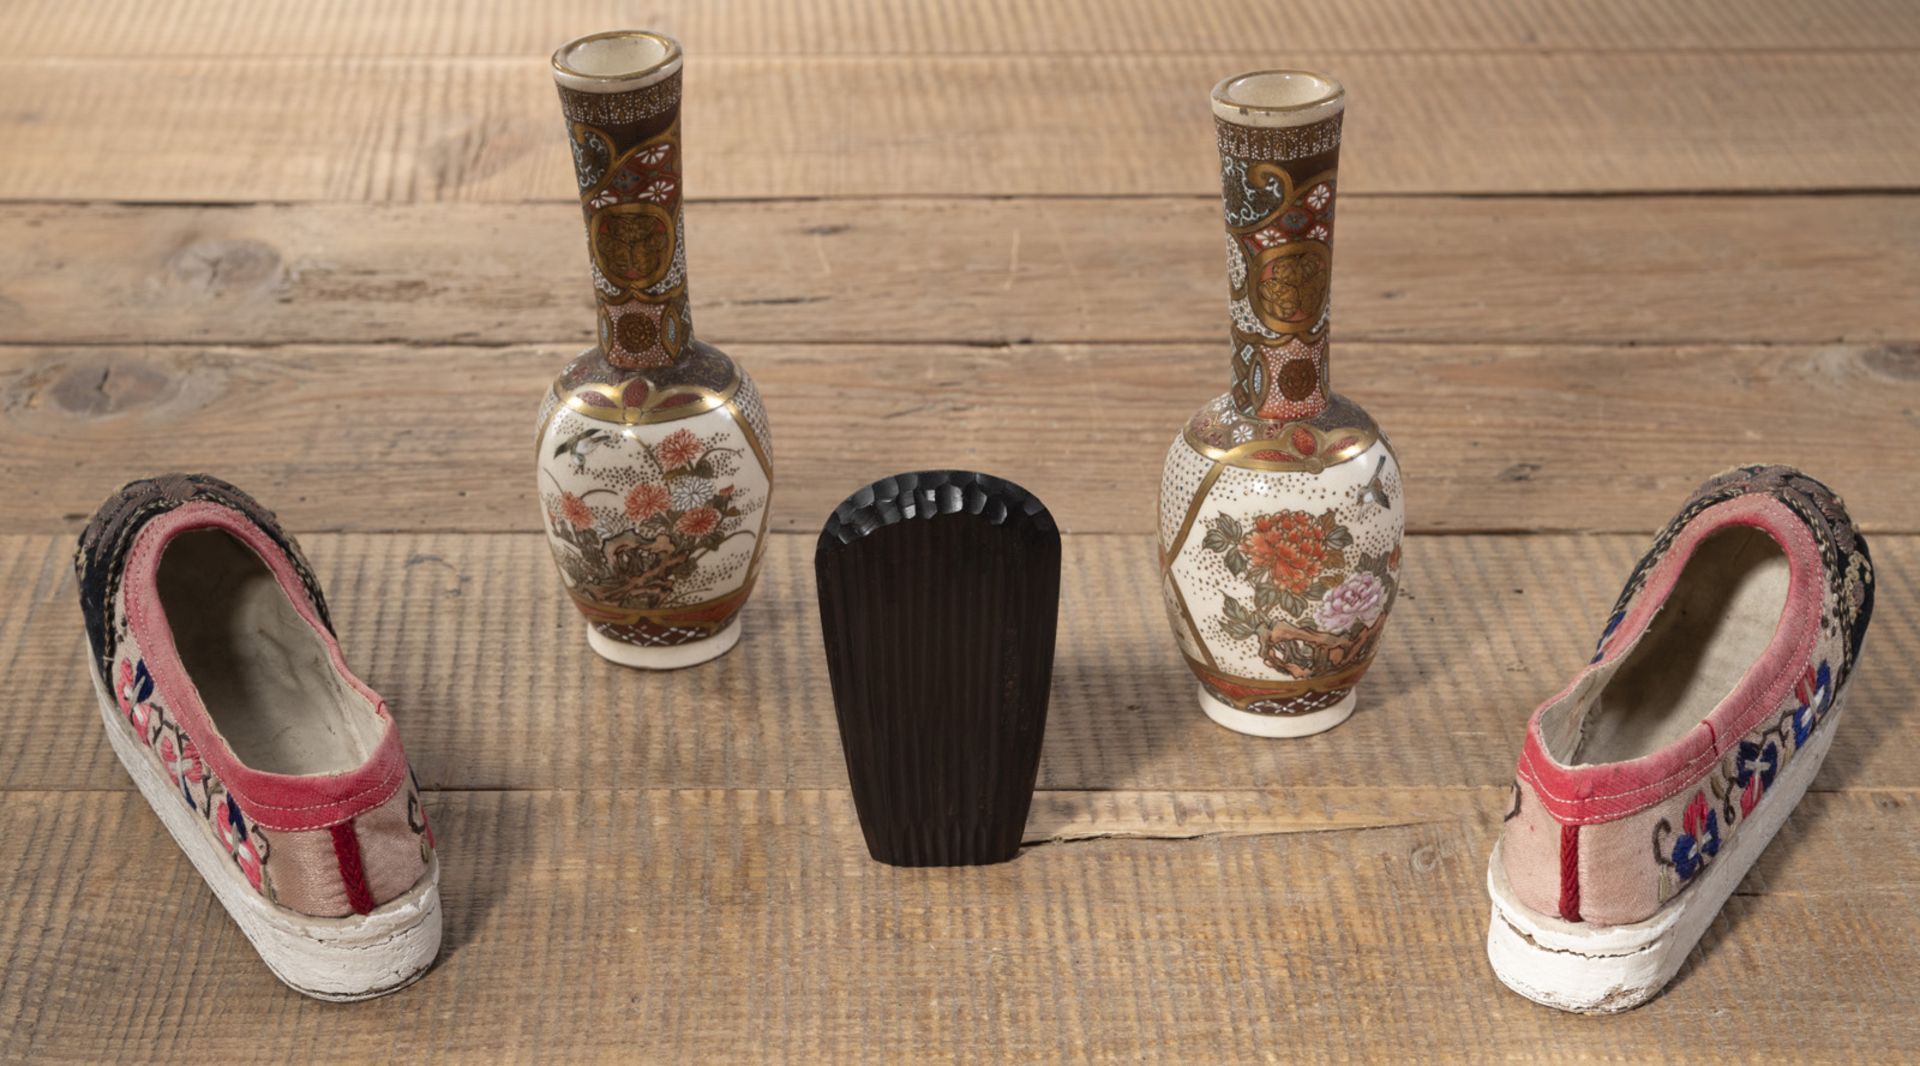 A PAIR OF SMALL SATSUMA VASES, A CARVED WOOD SHOVEL FOR INCENSE AND A PAIR OF OF EMBROIDERED SHOES - Image 2 of 3